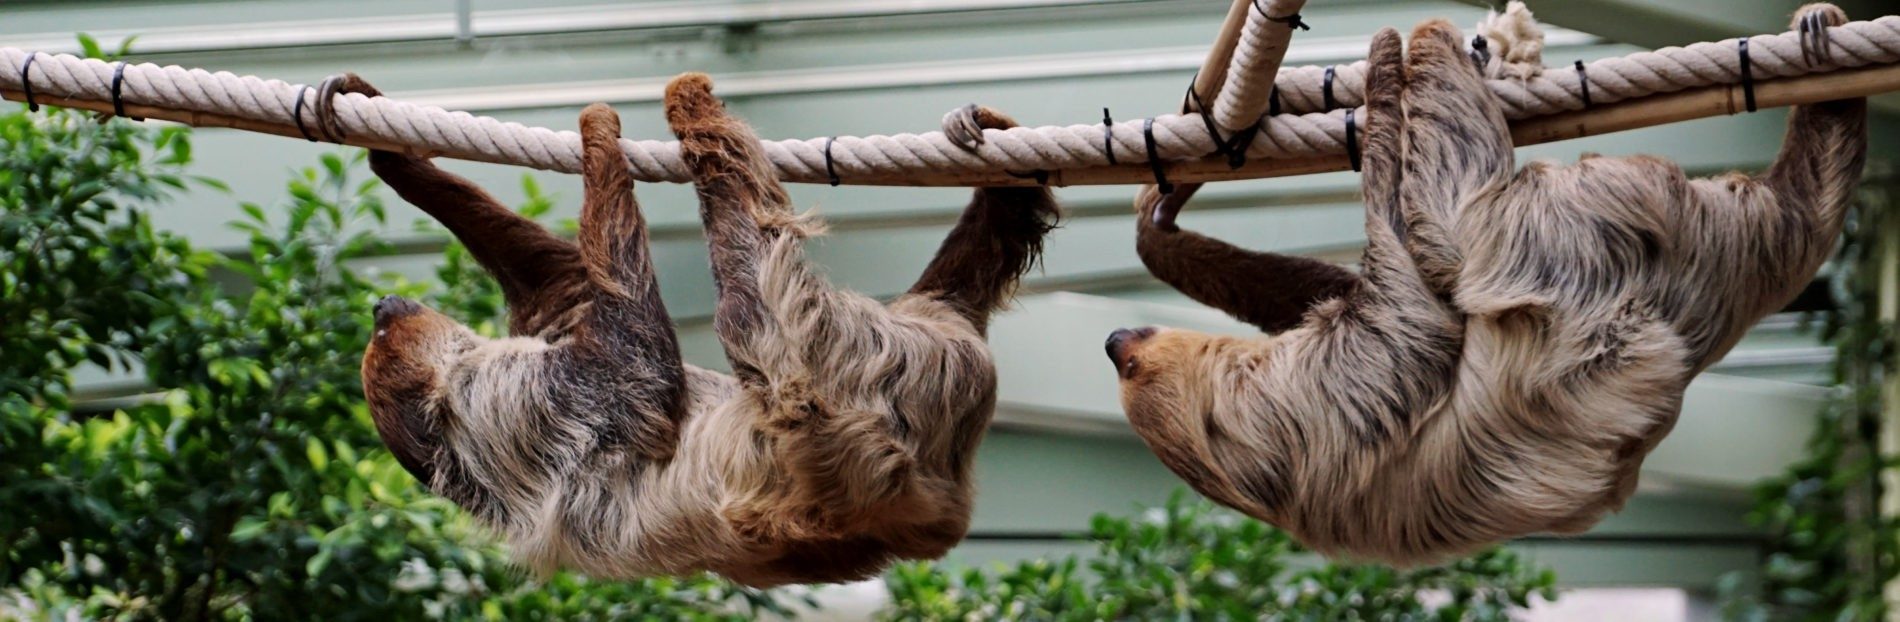 Two-toed sloths in Prof. Brandes House